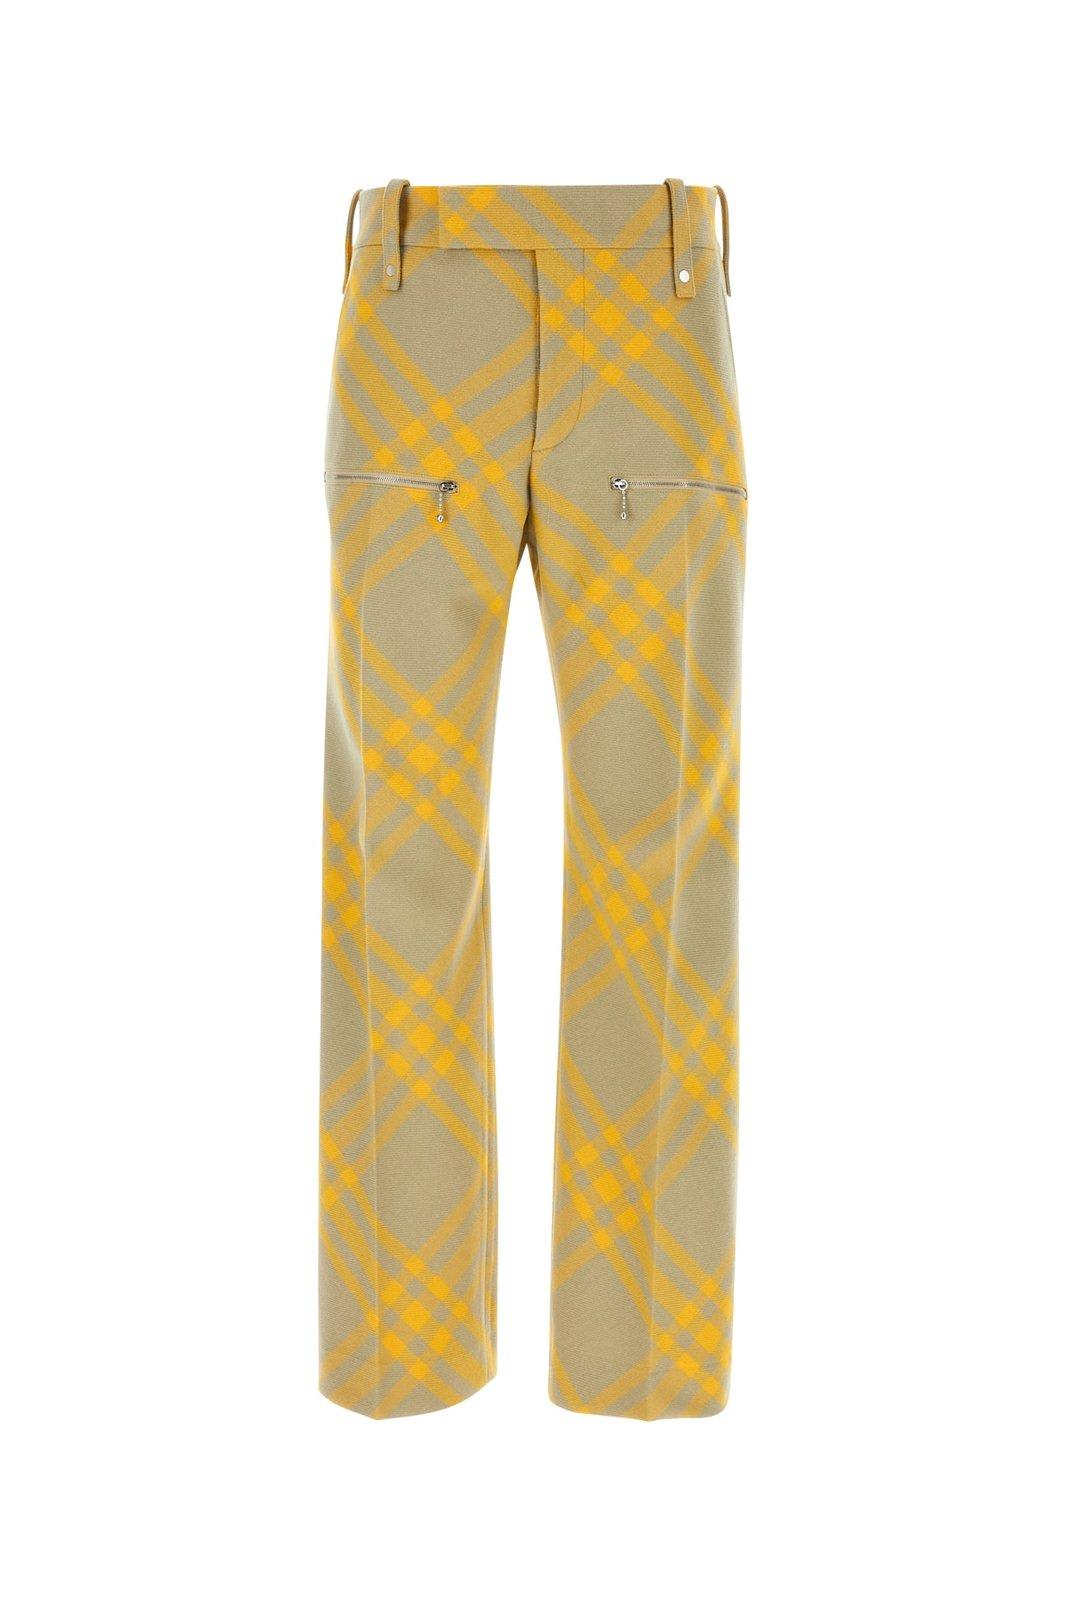 BURBERRY CHERED ZIP DETAILED PANTS